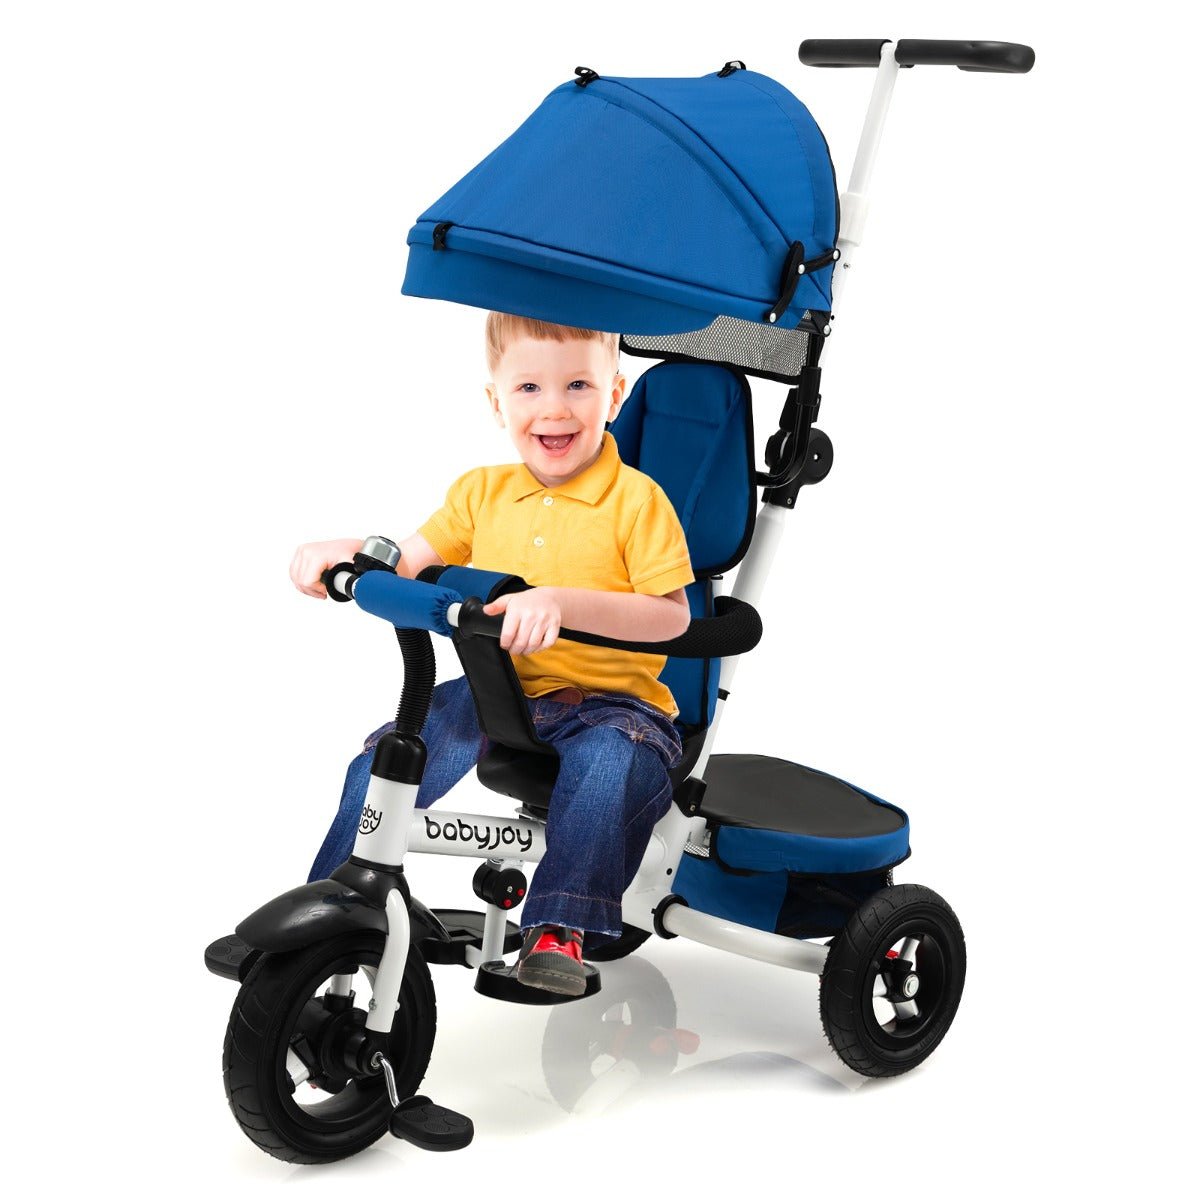 Blue Tricycle Stroller: Where Comfort Meets Convenience